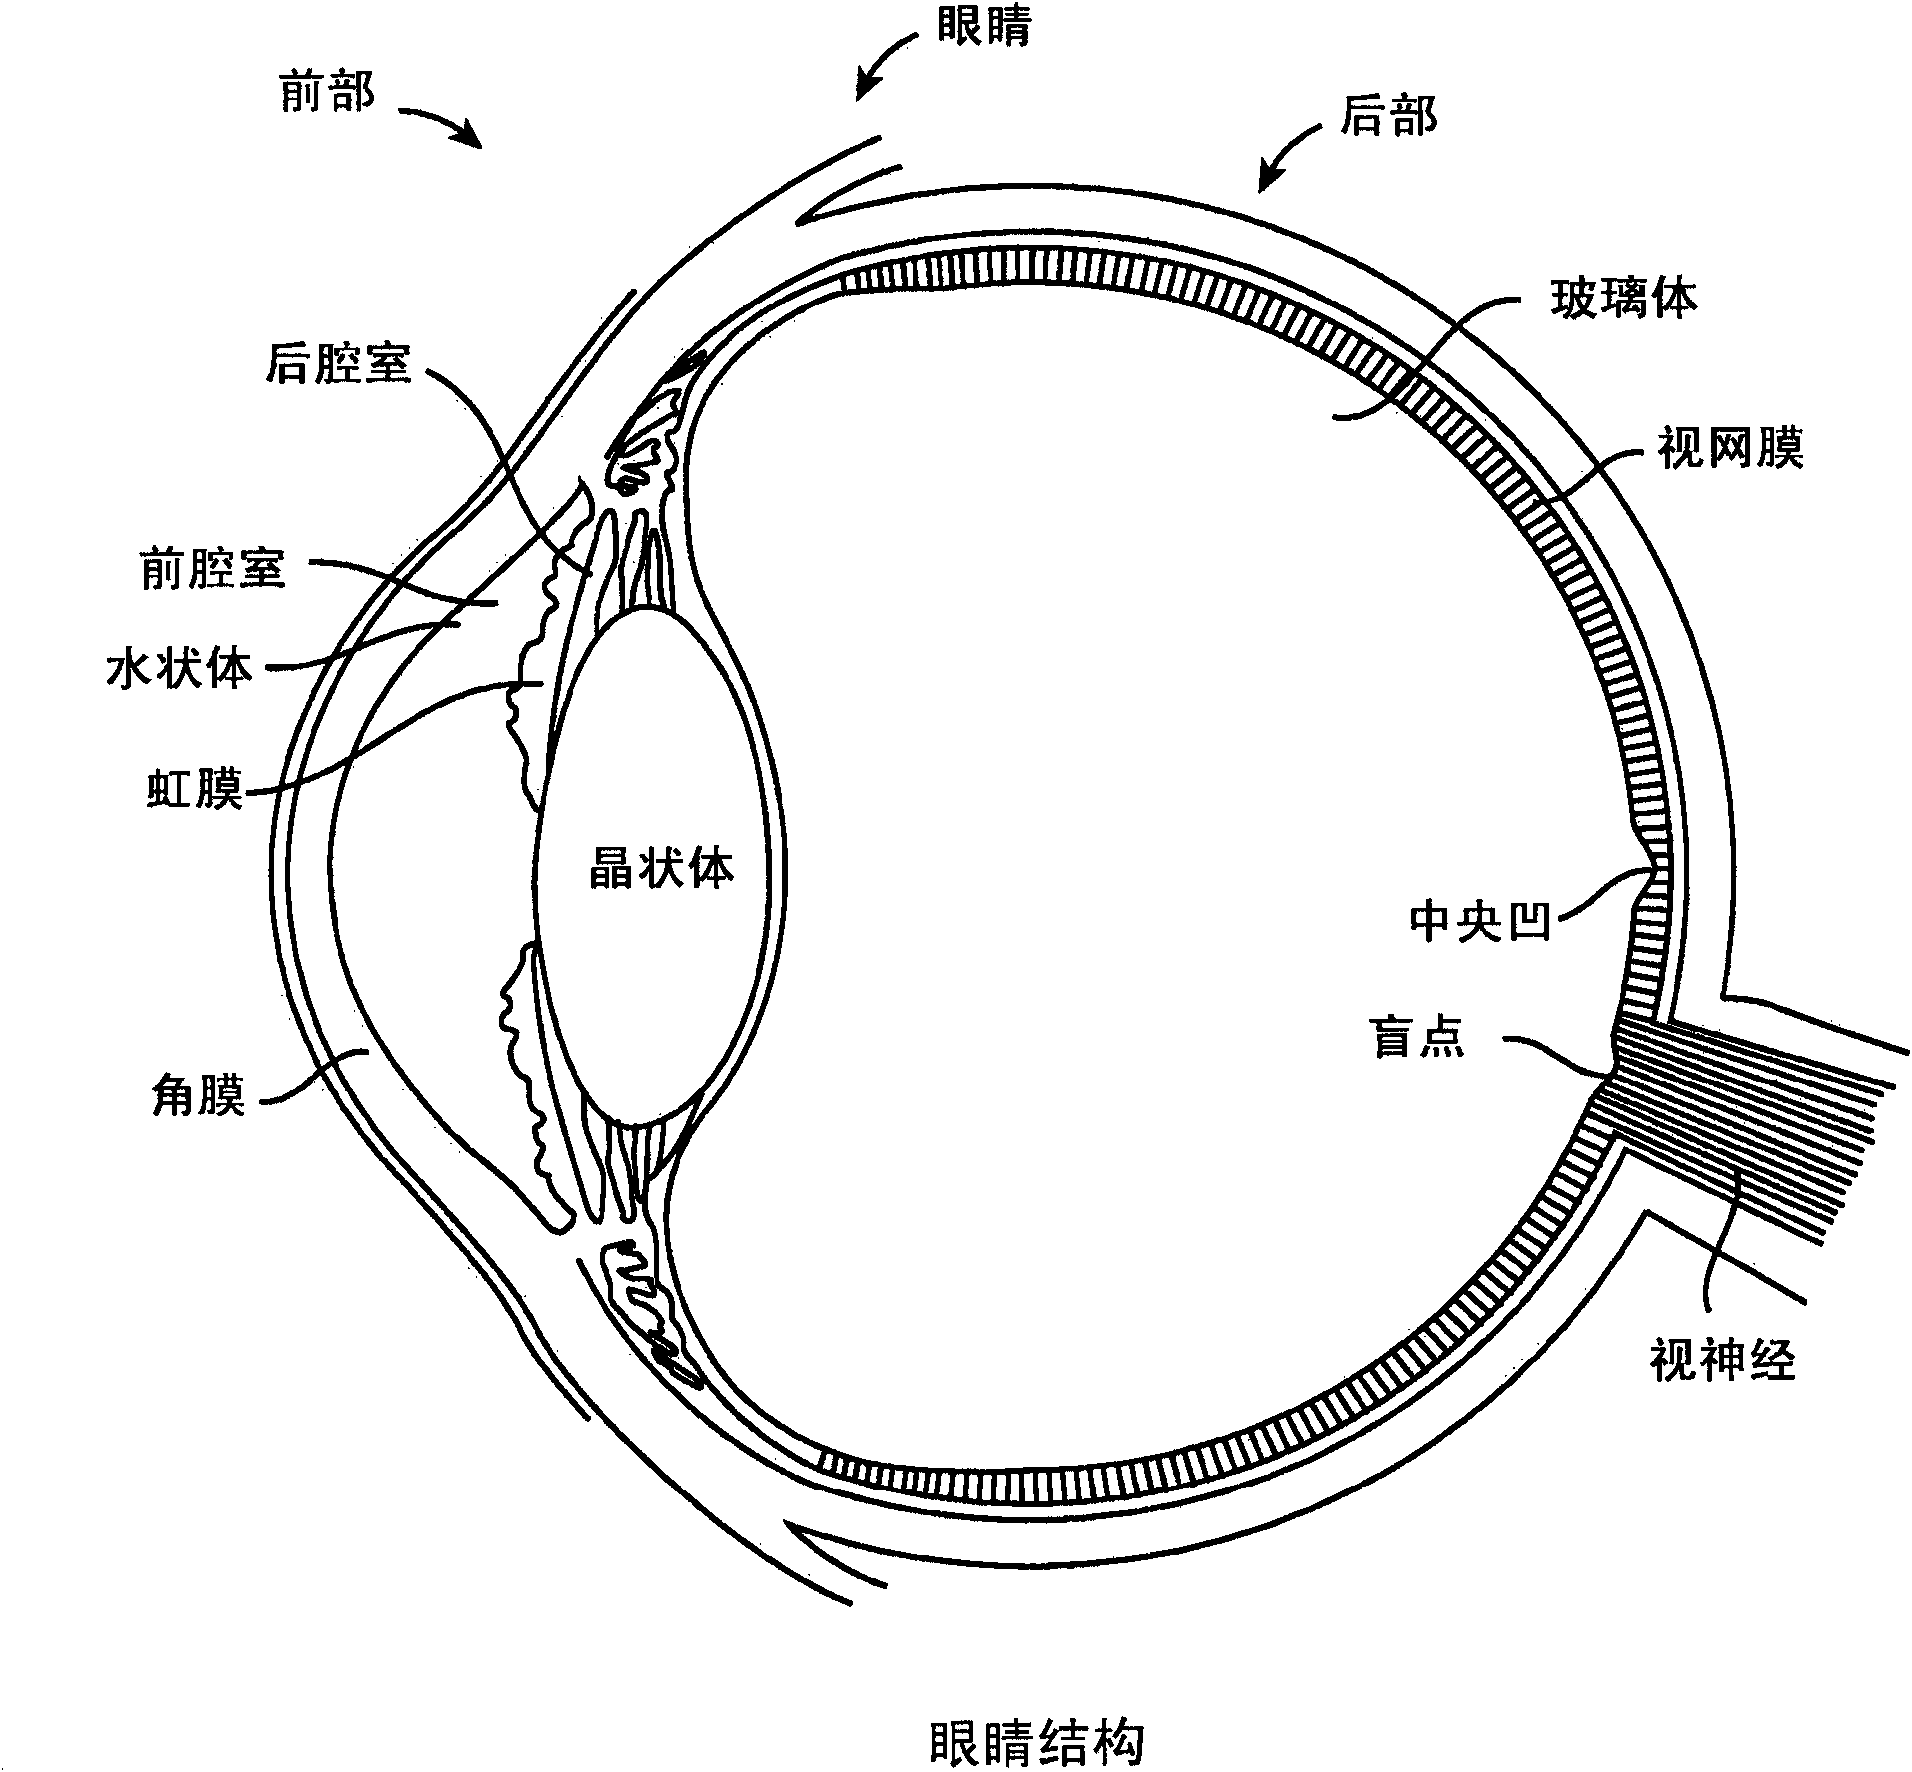 Implantable ophthalmic MEMS sensor devices and methods for eye surgery